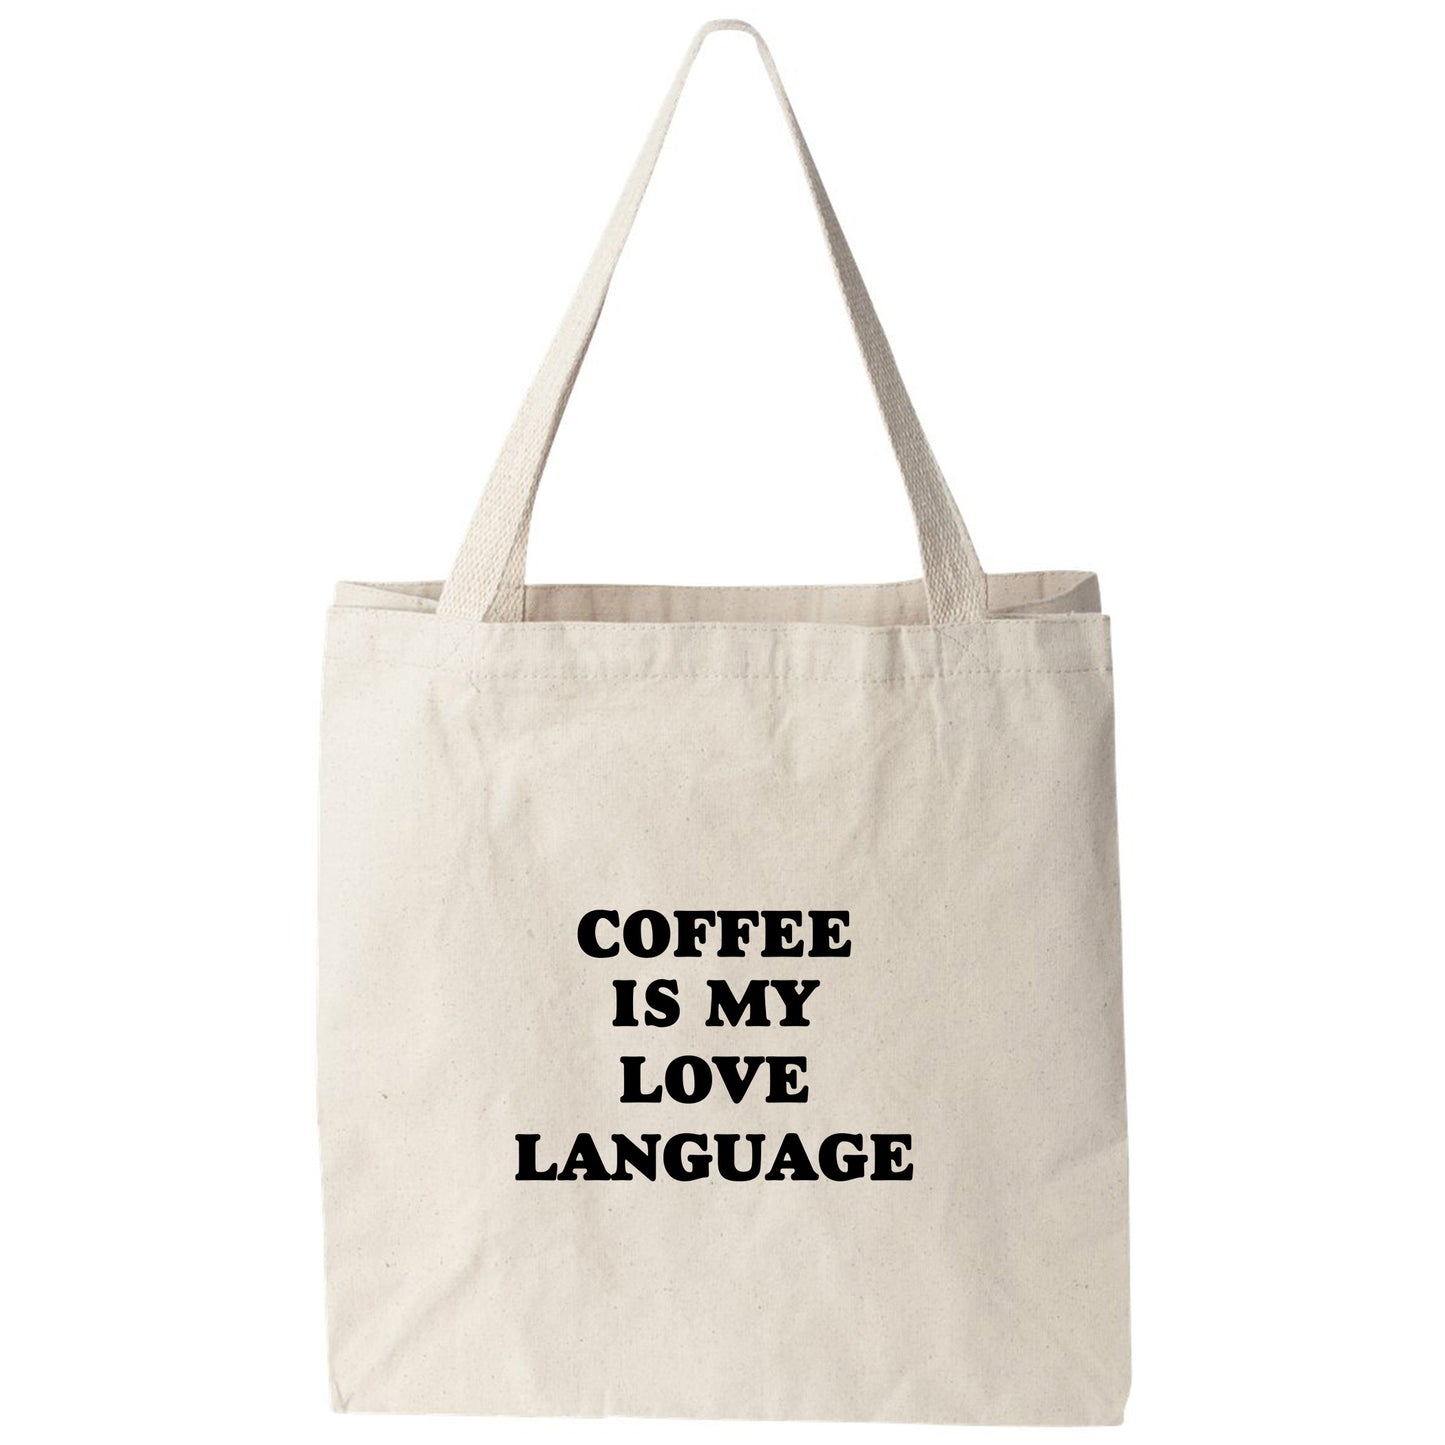 a tote bag that says coffee is my love language